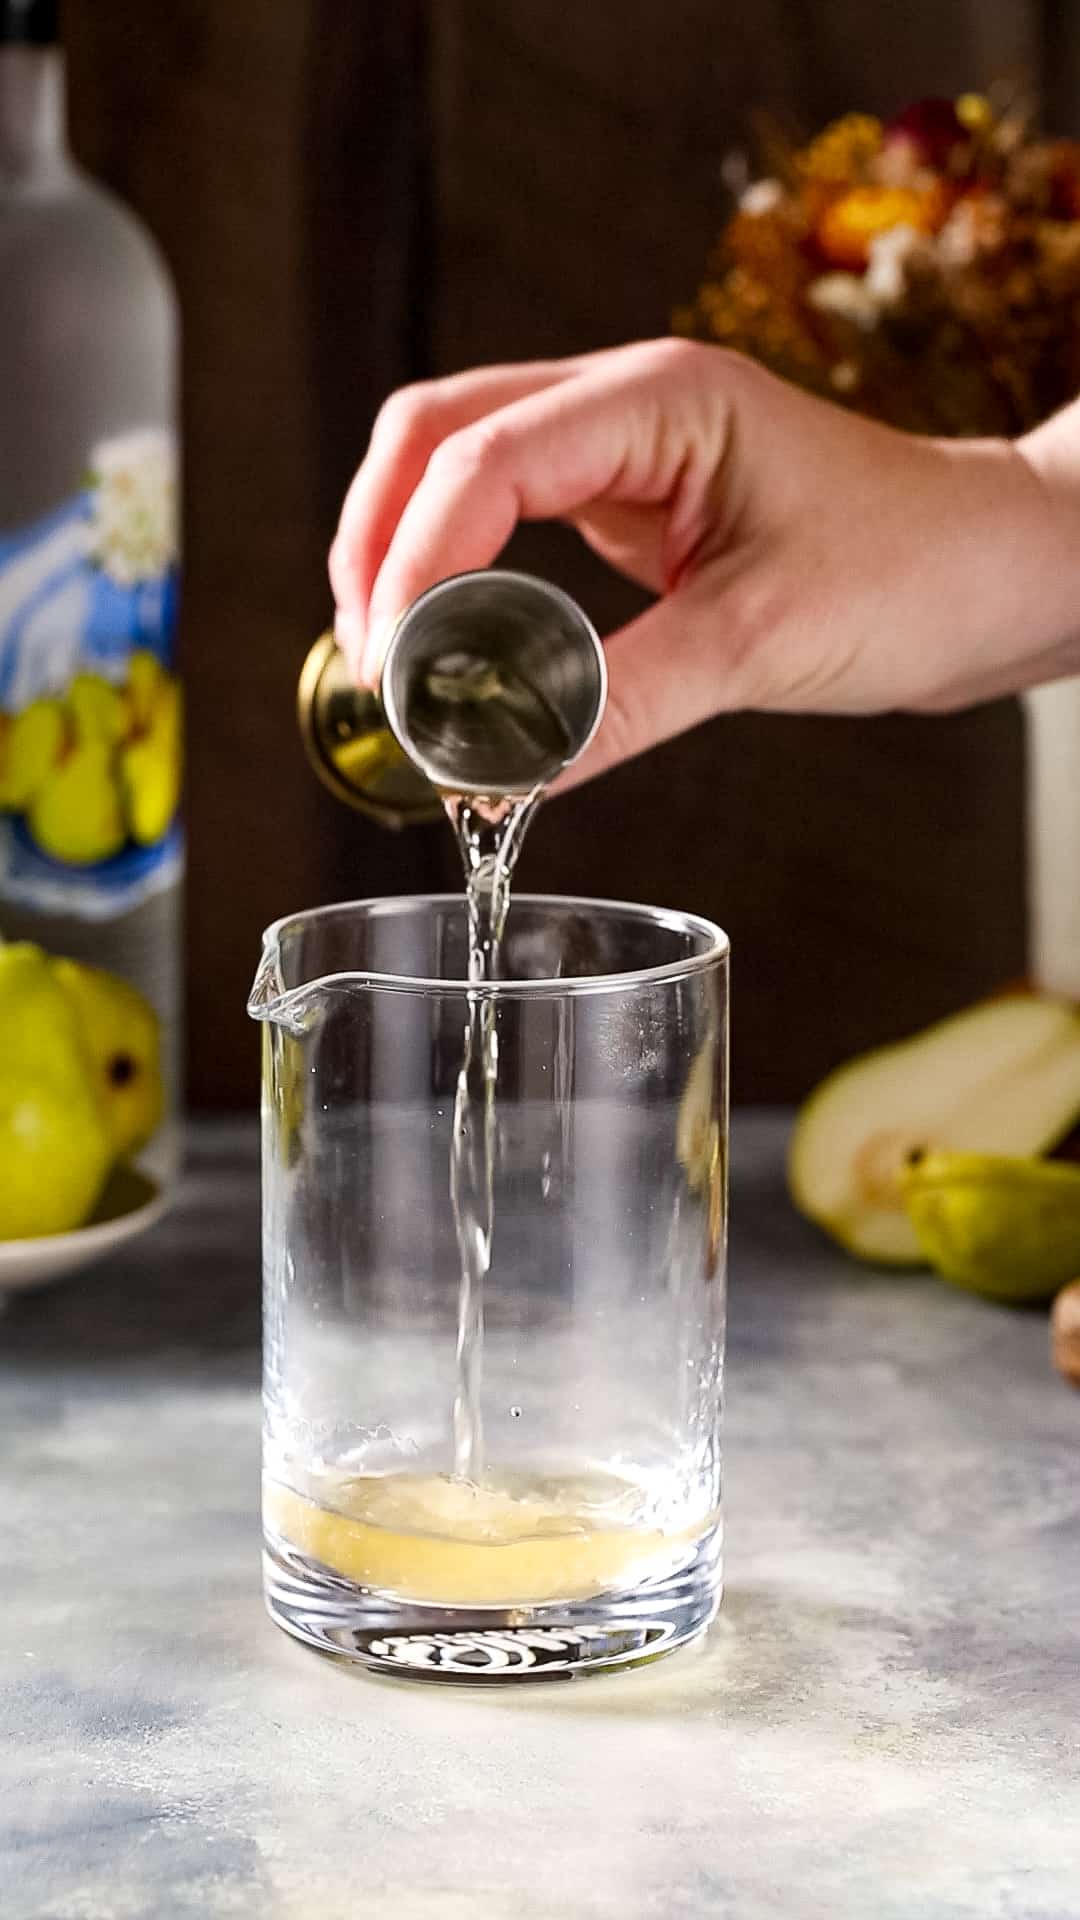 Hand pouring dry vermouth into a cocktail mixing glass from a gold jigger.